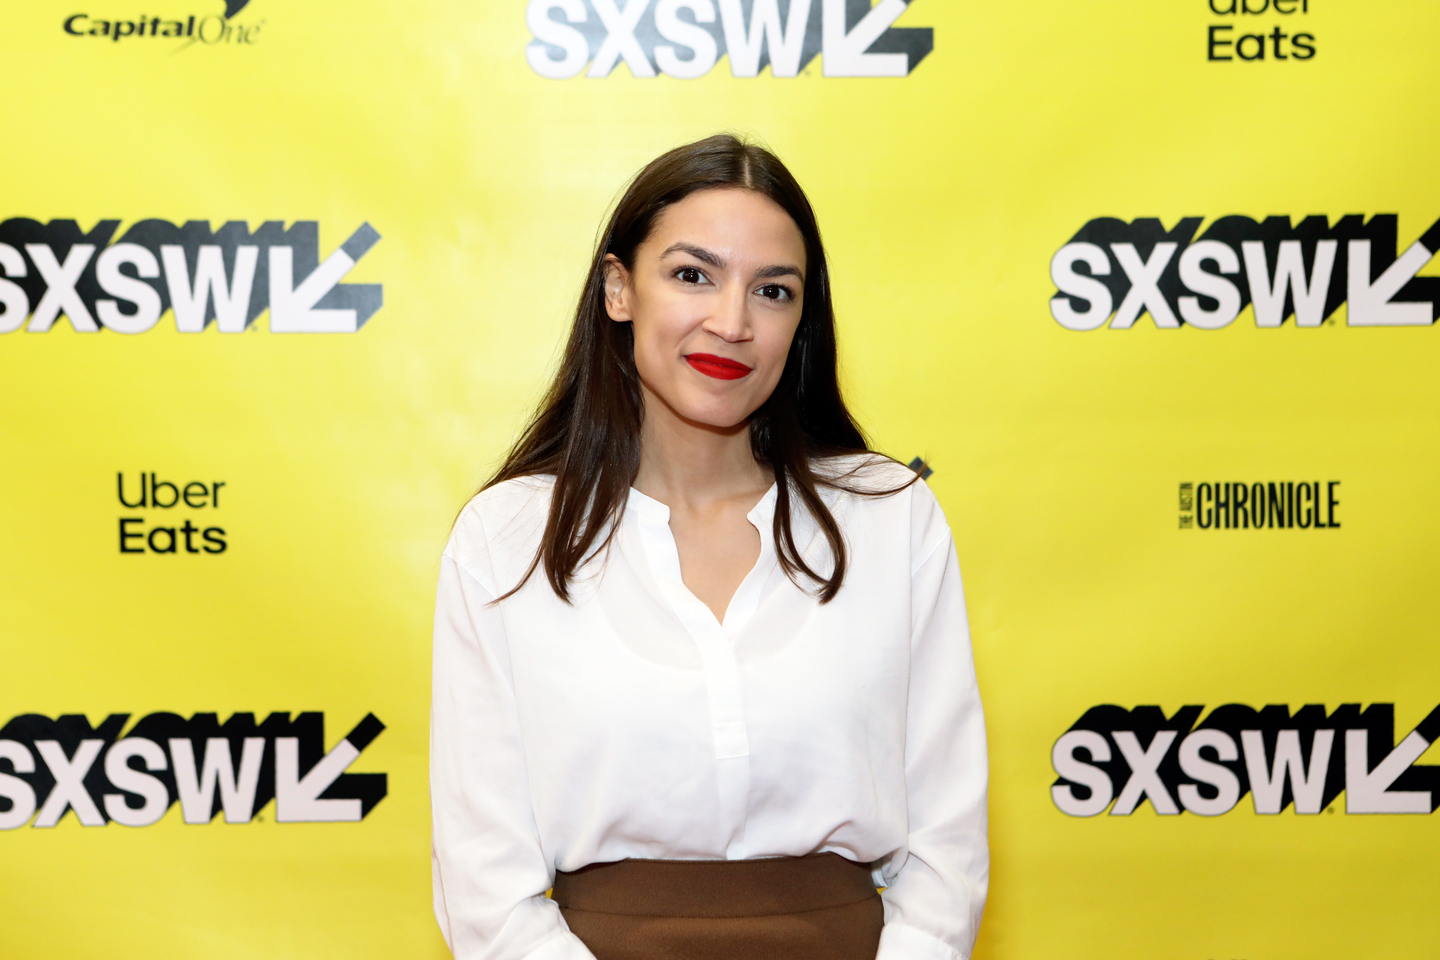 Featured Session Alexandria Ocasio-Cortez and the New Left - Photo by Samantha Burkardt/Getty Images for SXSW